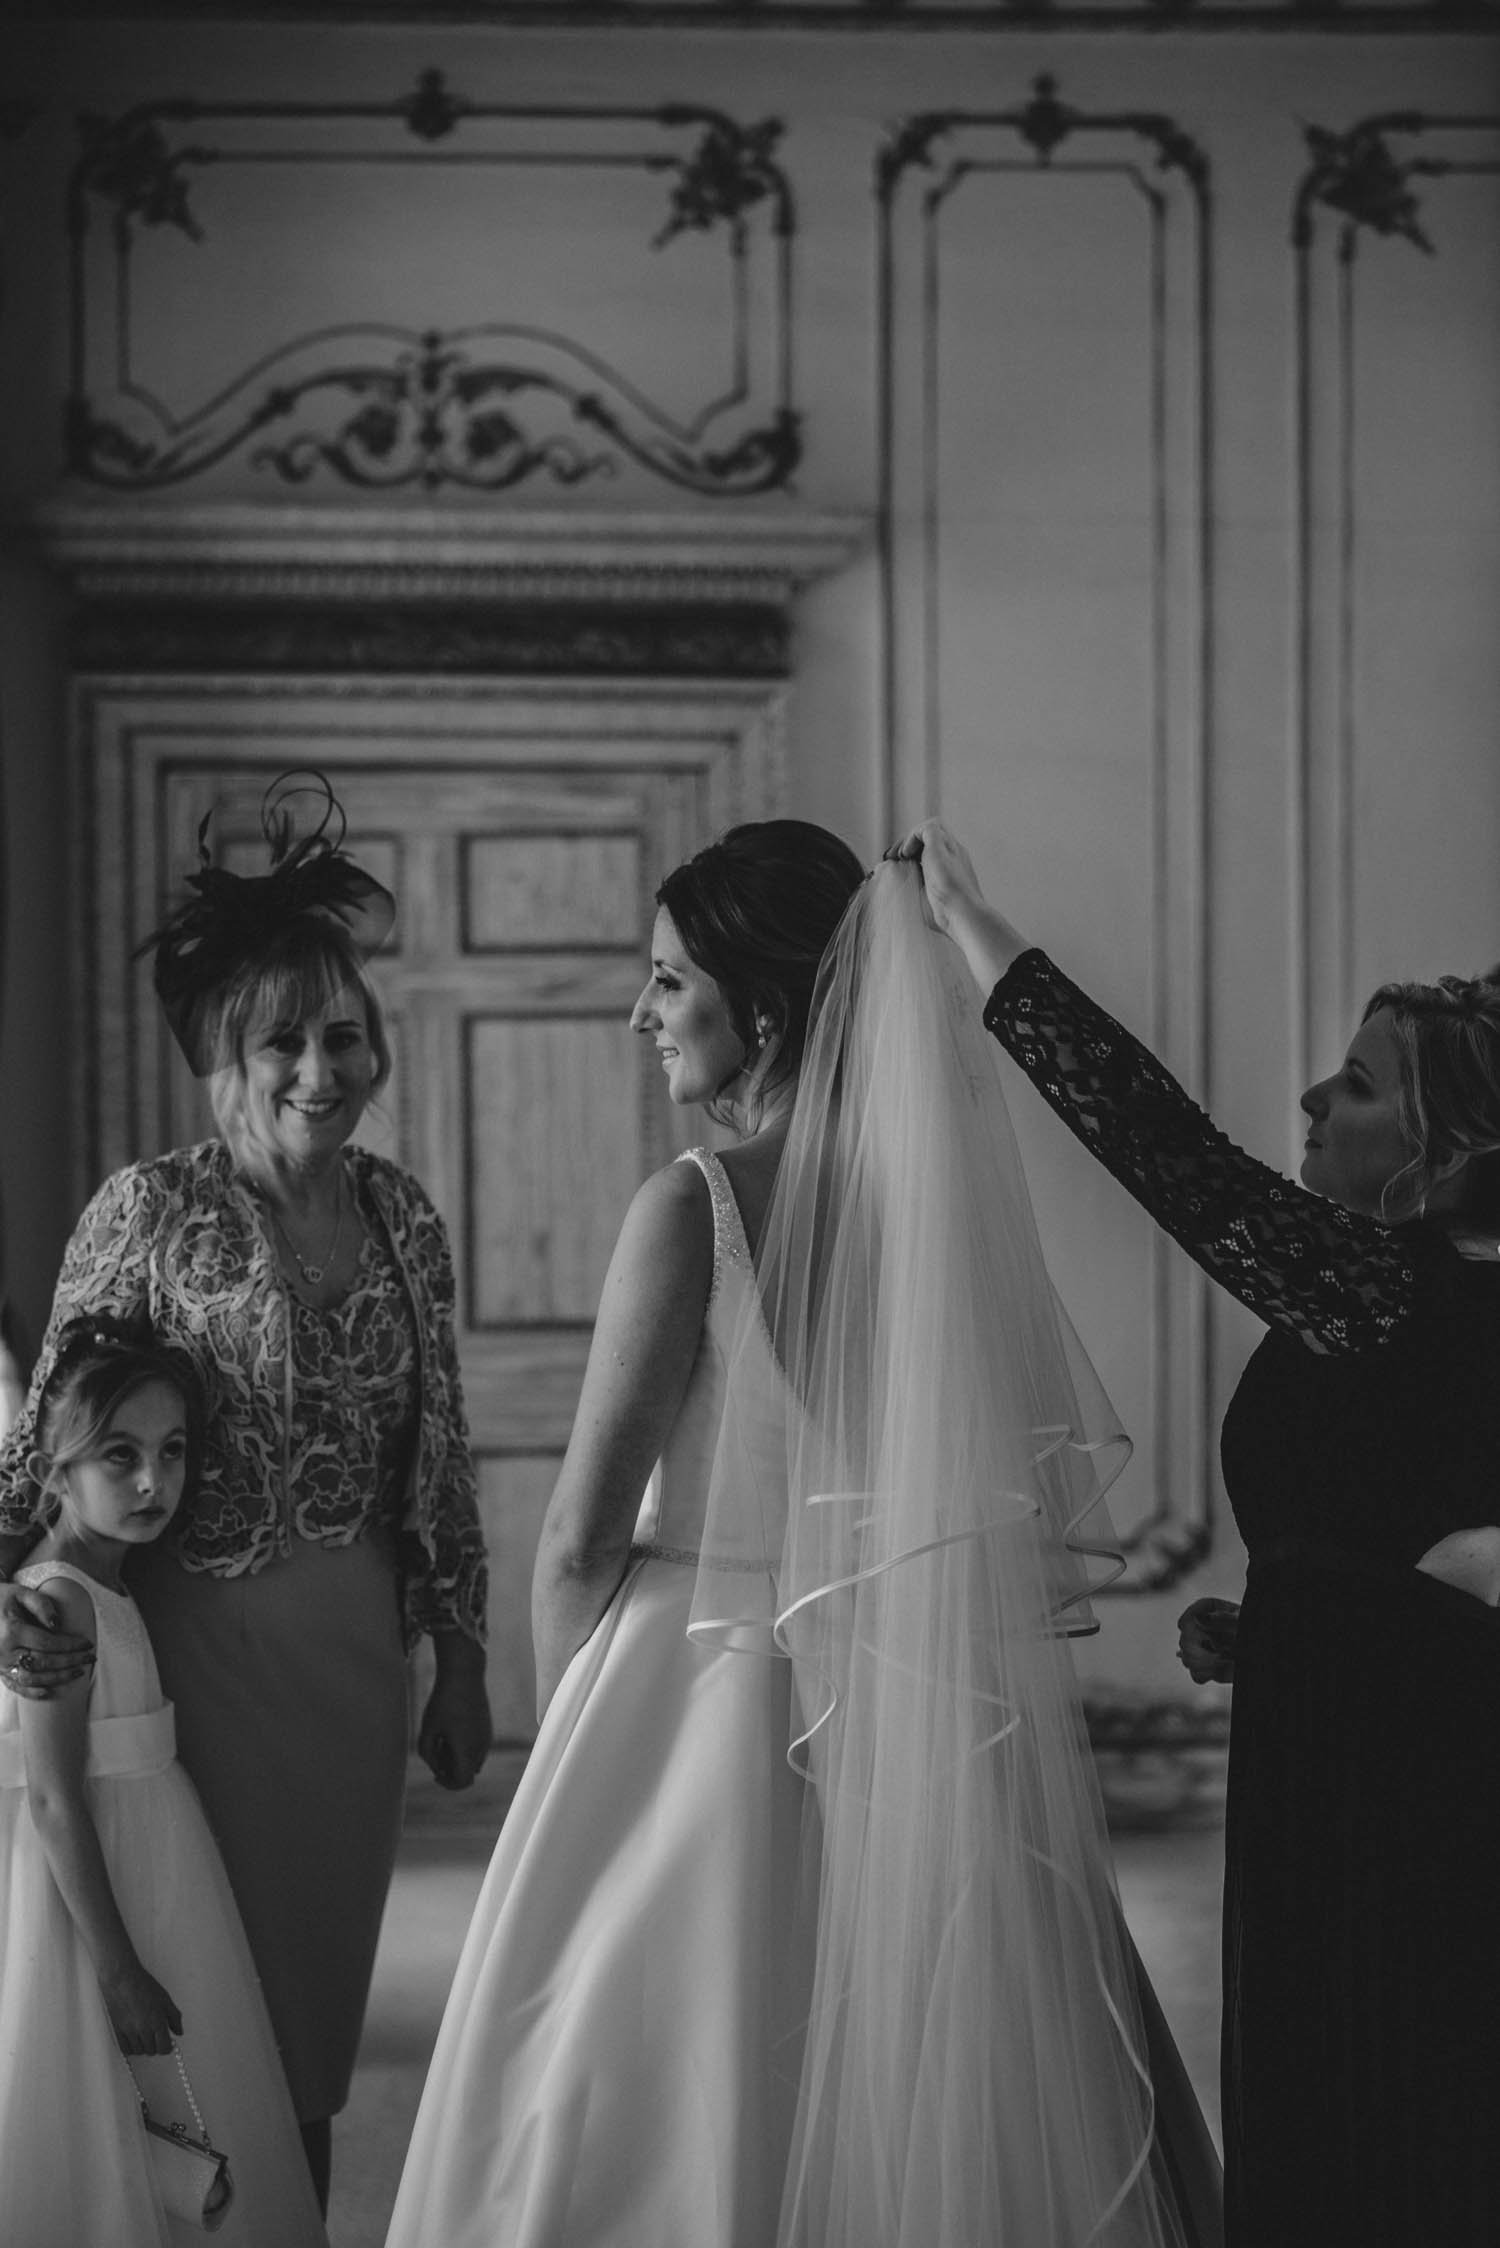 Bride putting veil on in bridal suite with help